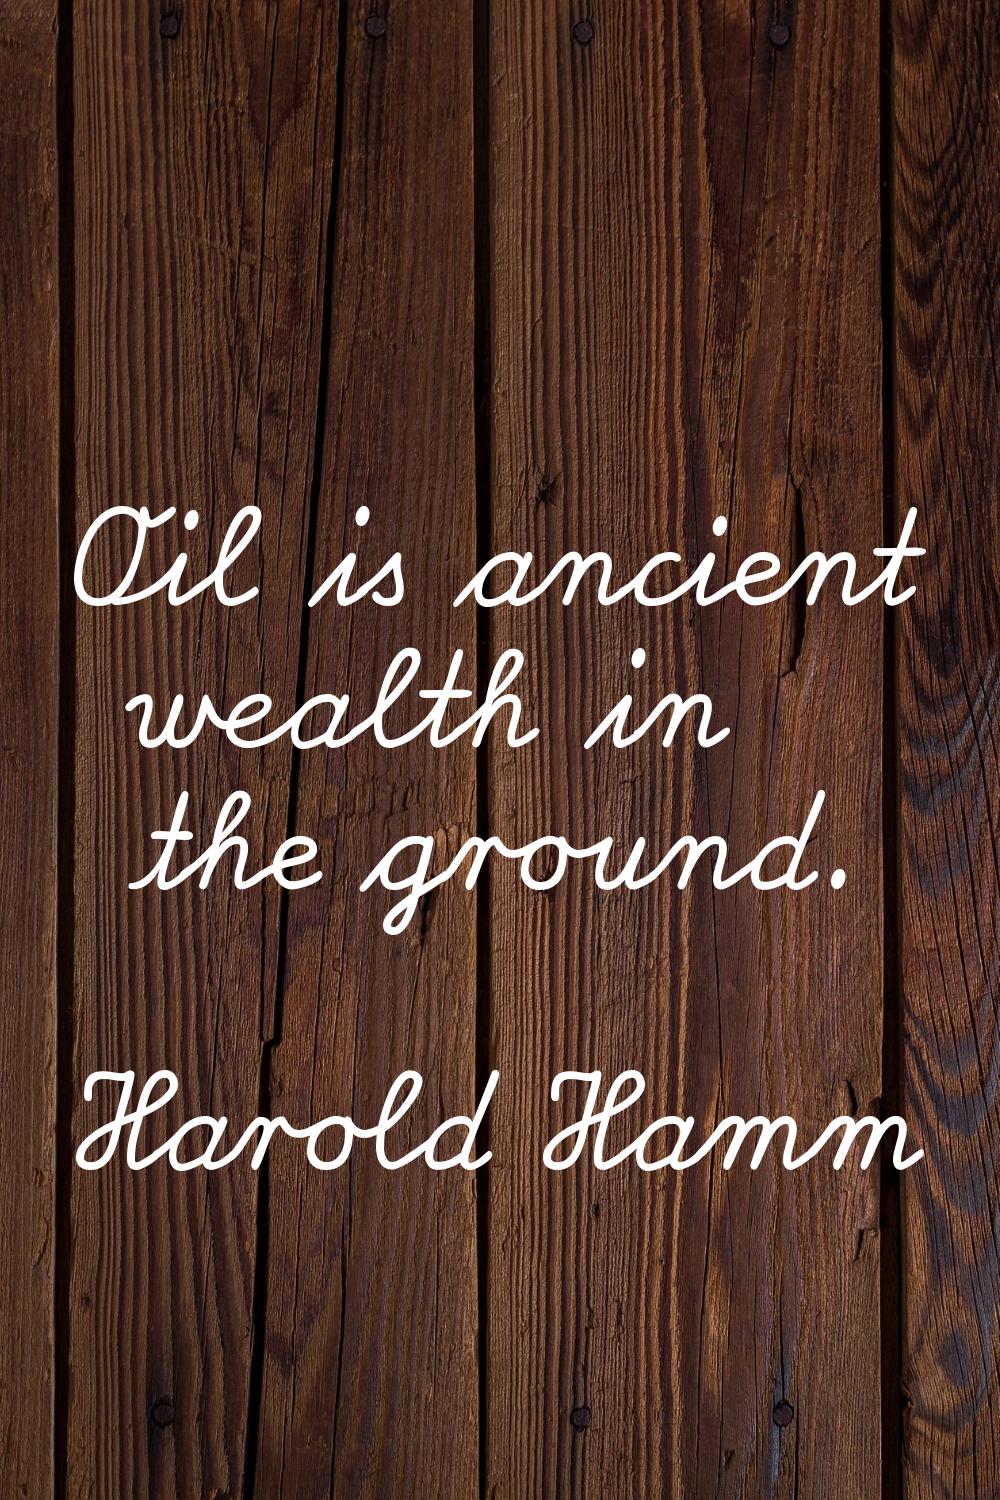 Oil is ancient wealth in the ground.